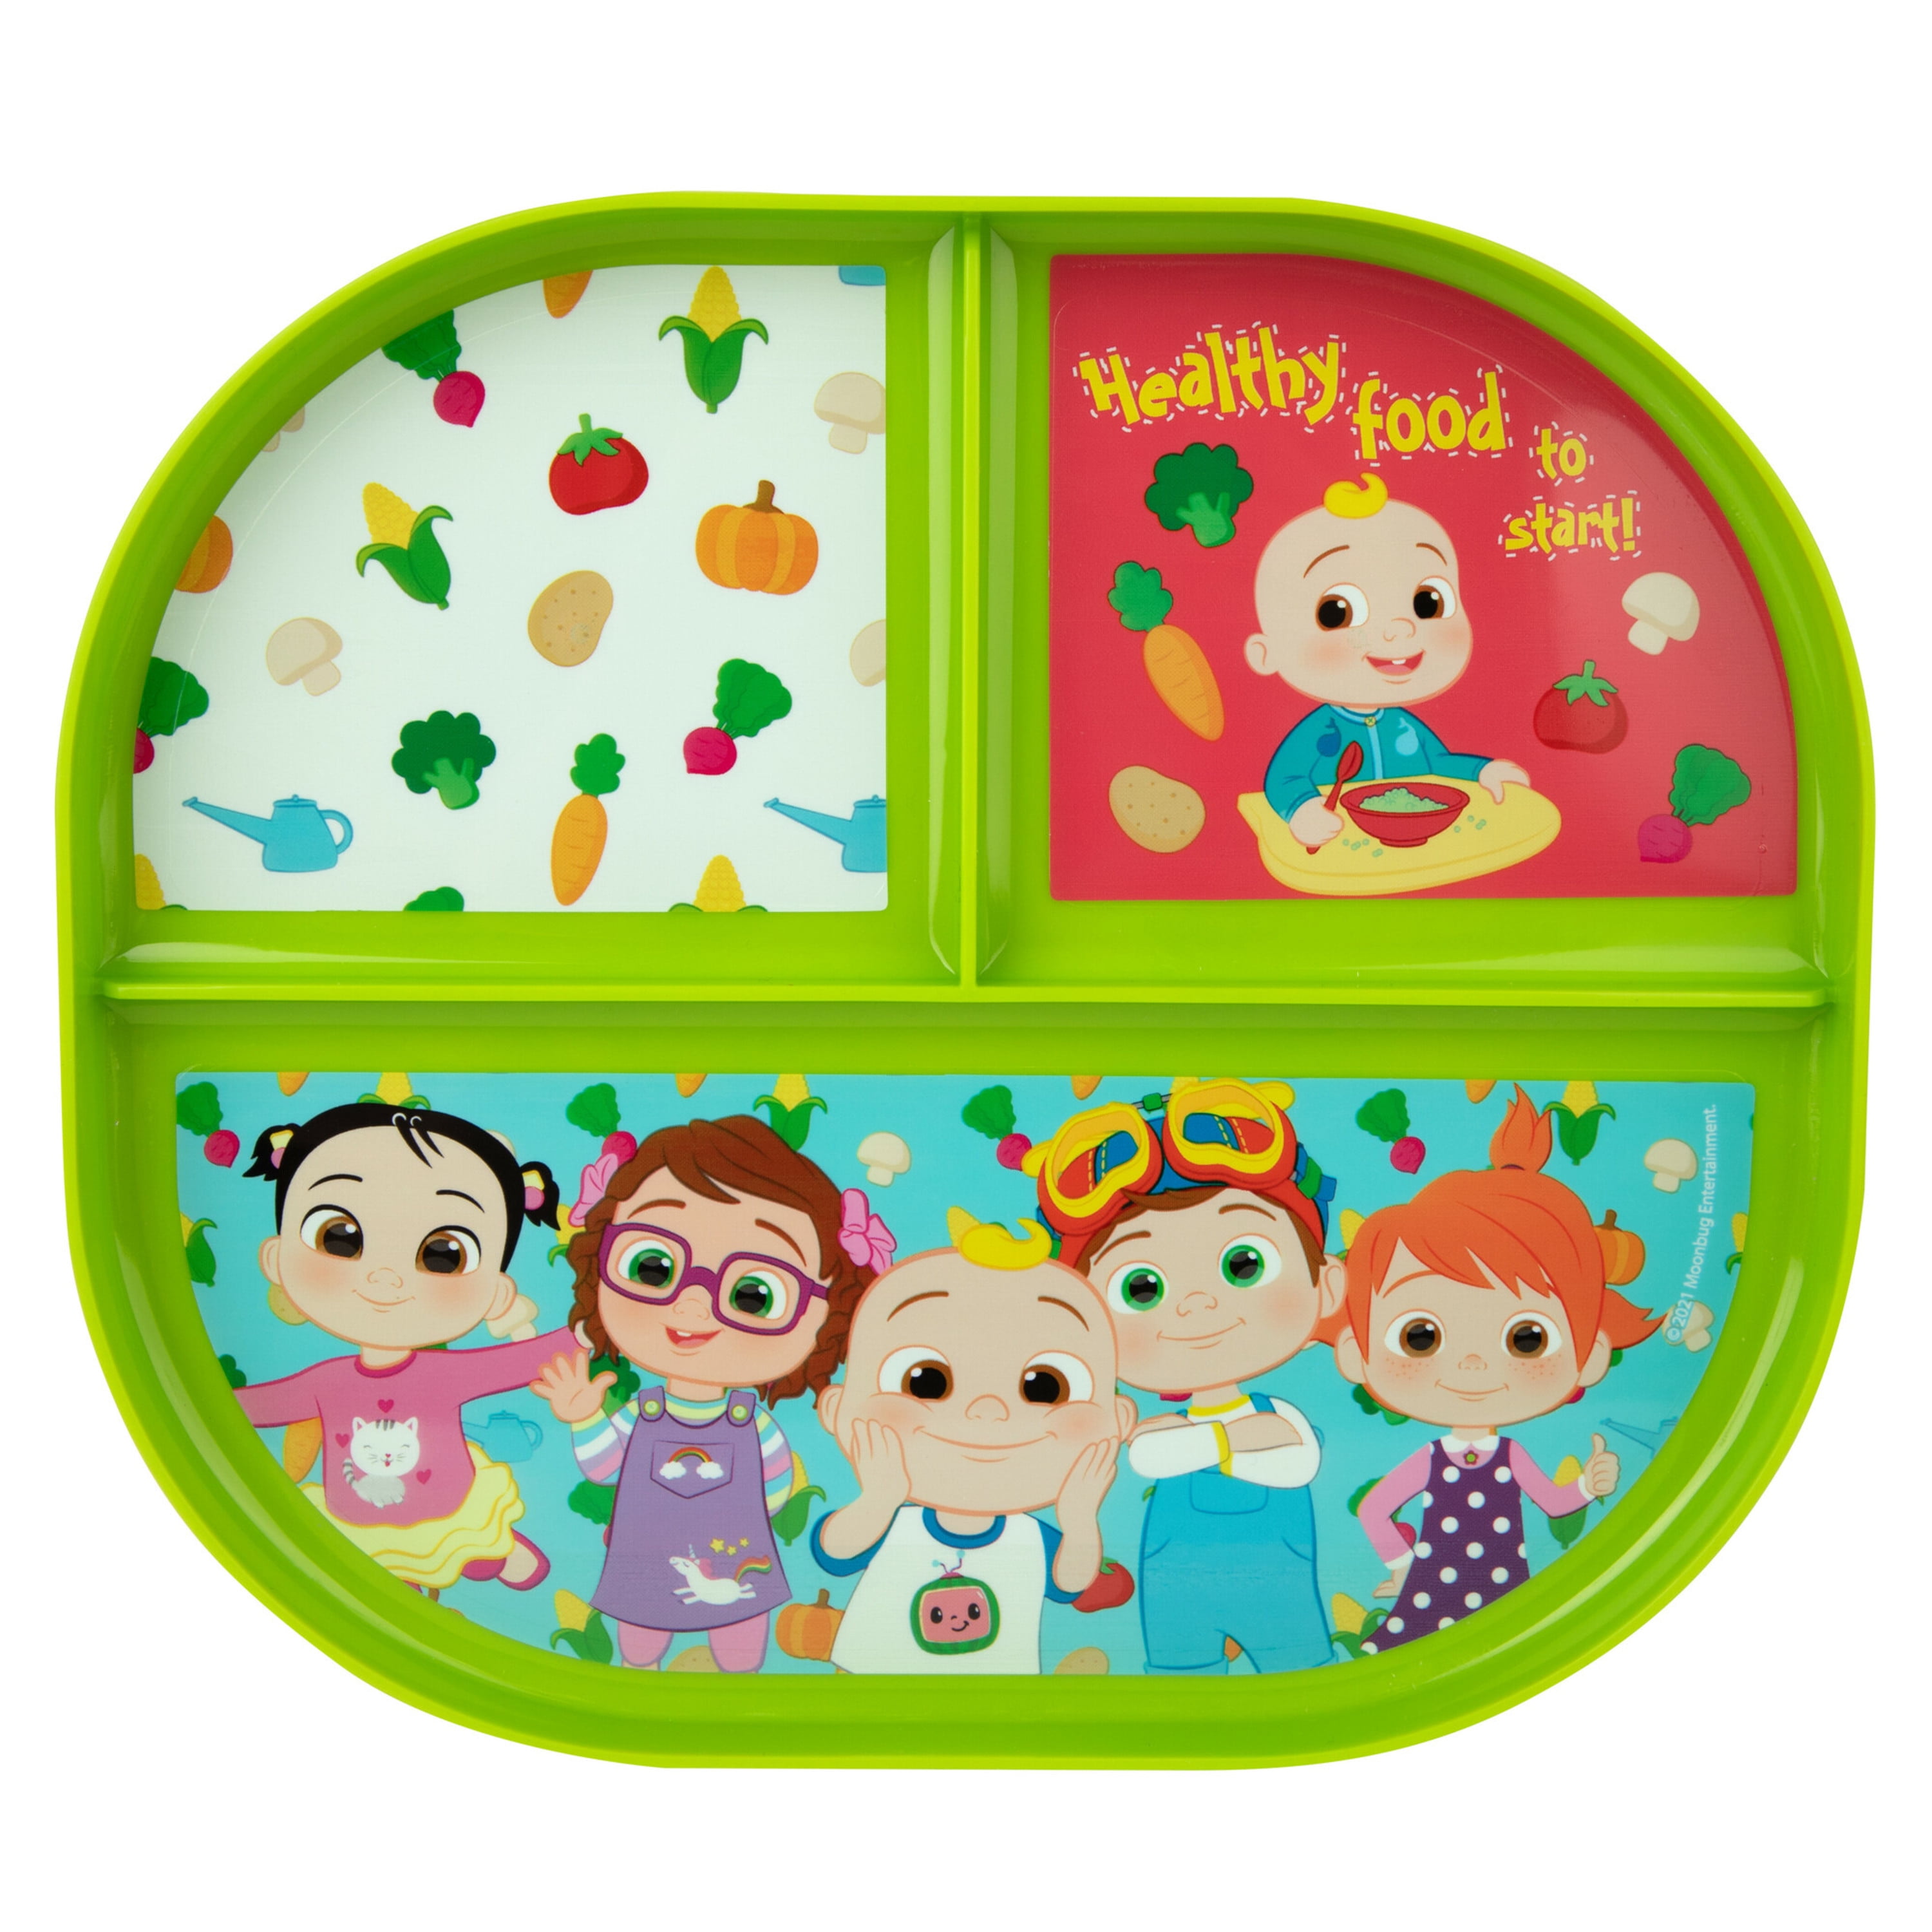 CoComelon 2-Sided Plate - Dishwasher Safe Toddler Plate